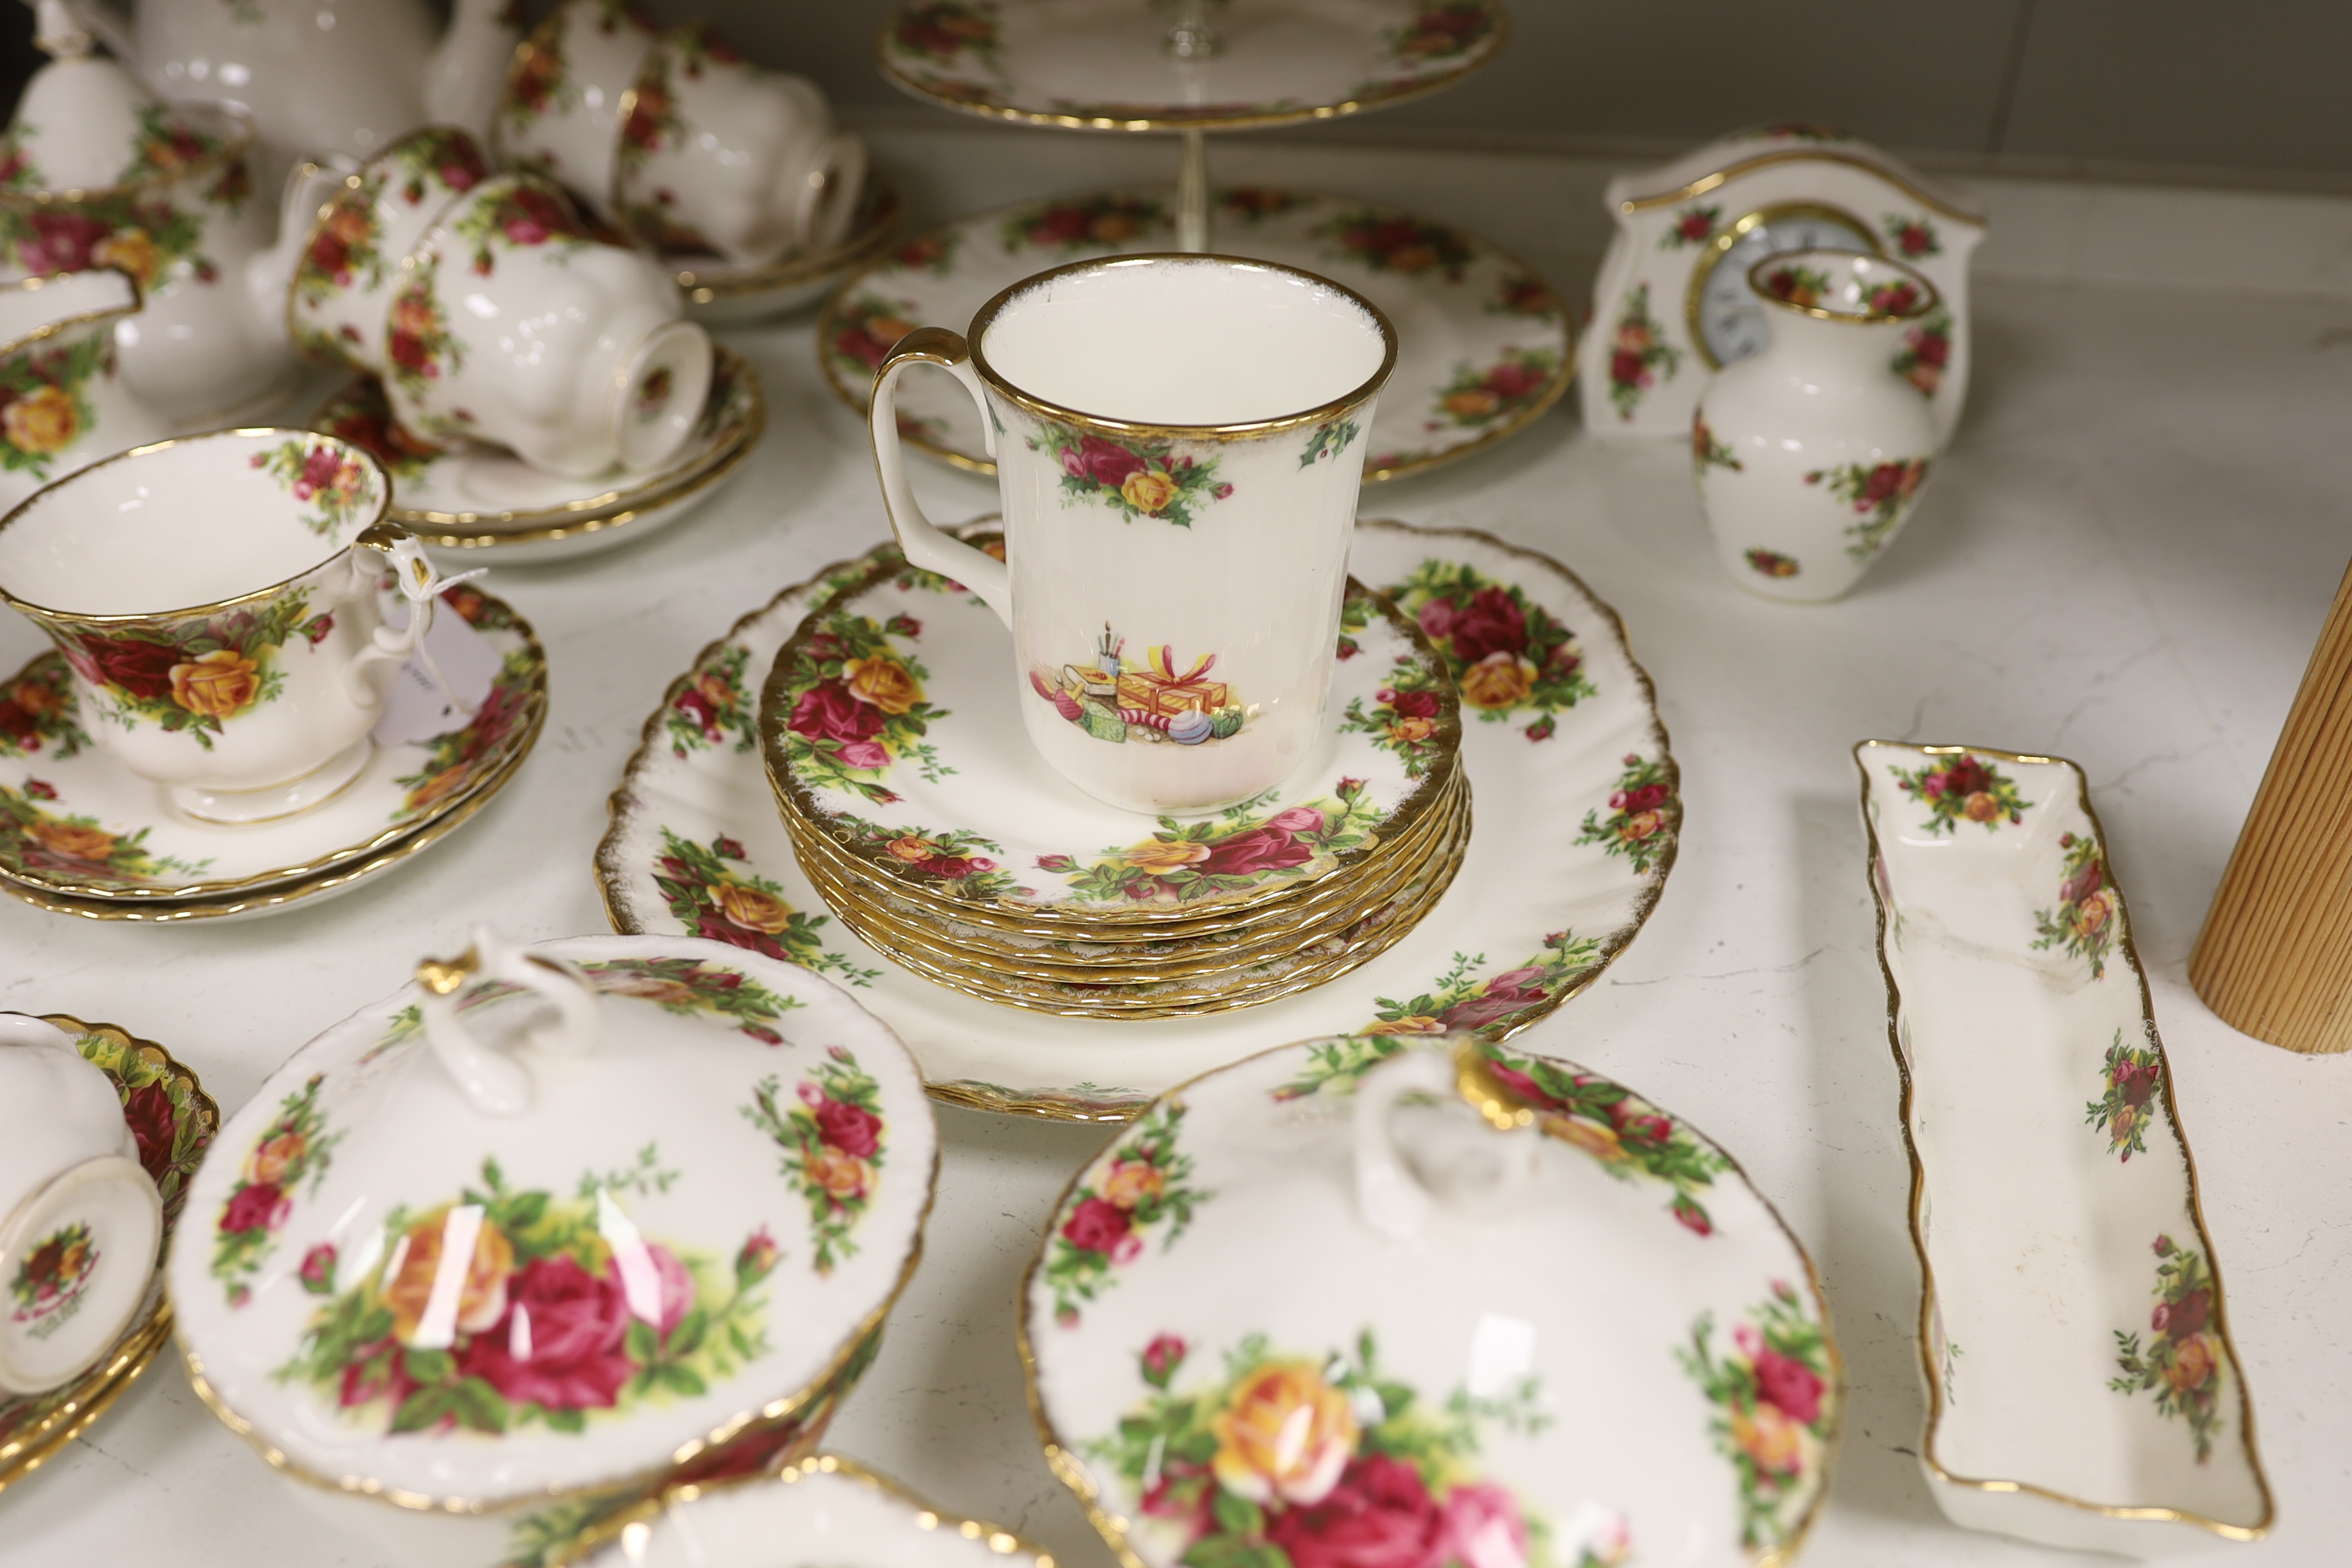 A Royal Albert Old Country Roses part tea and coffee service